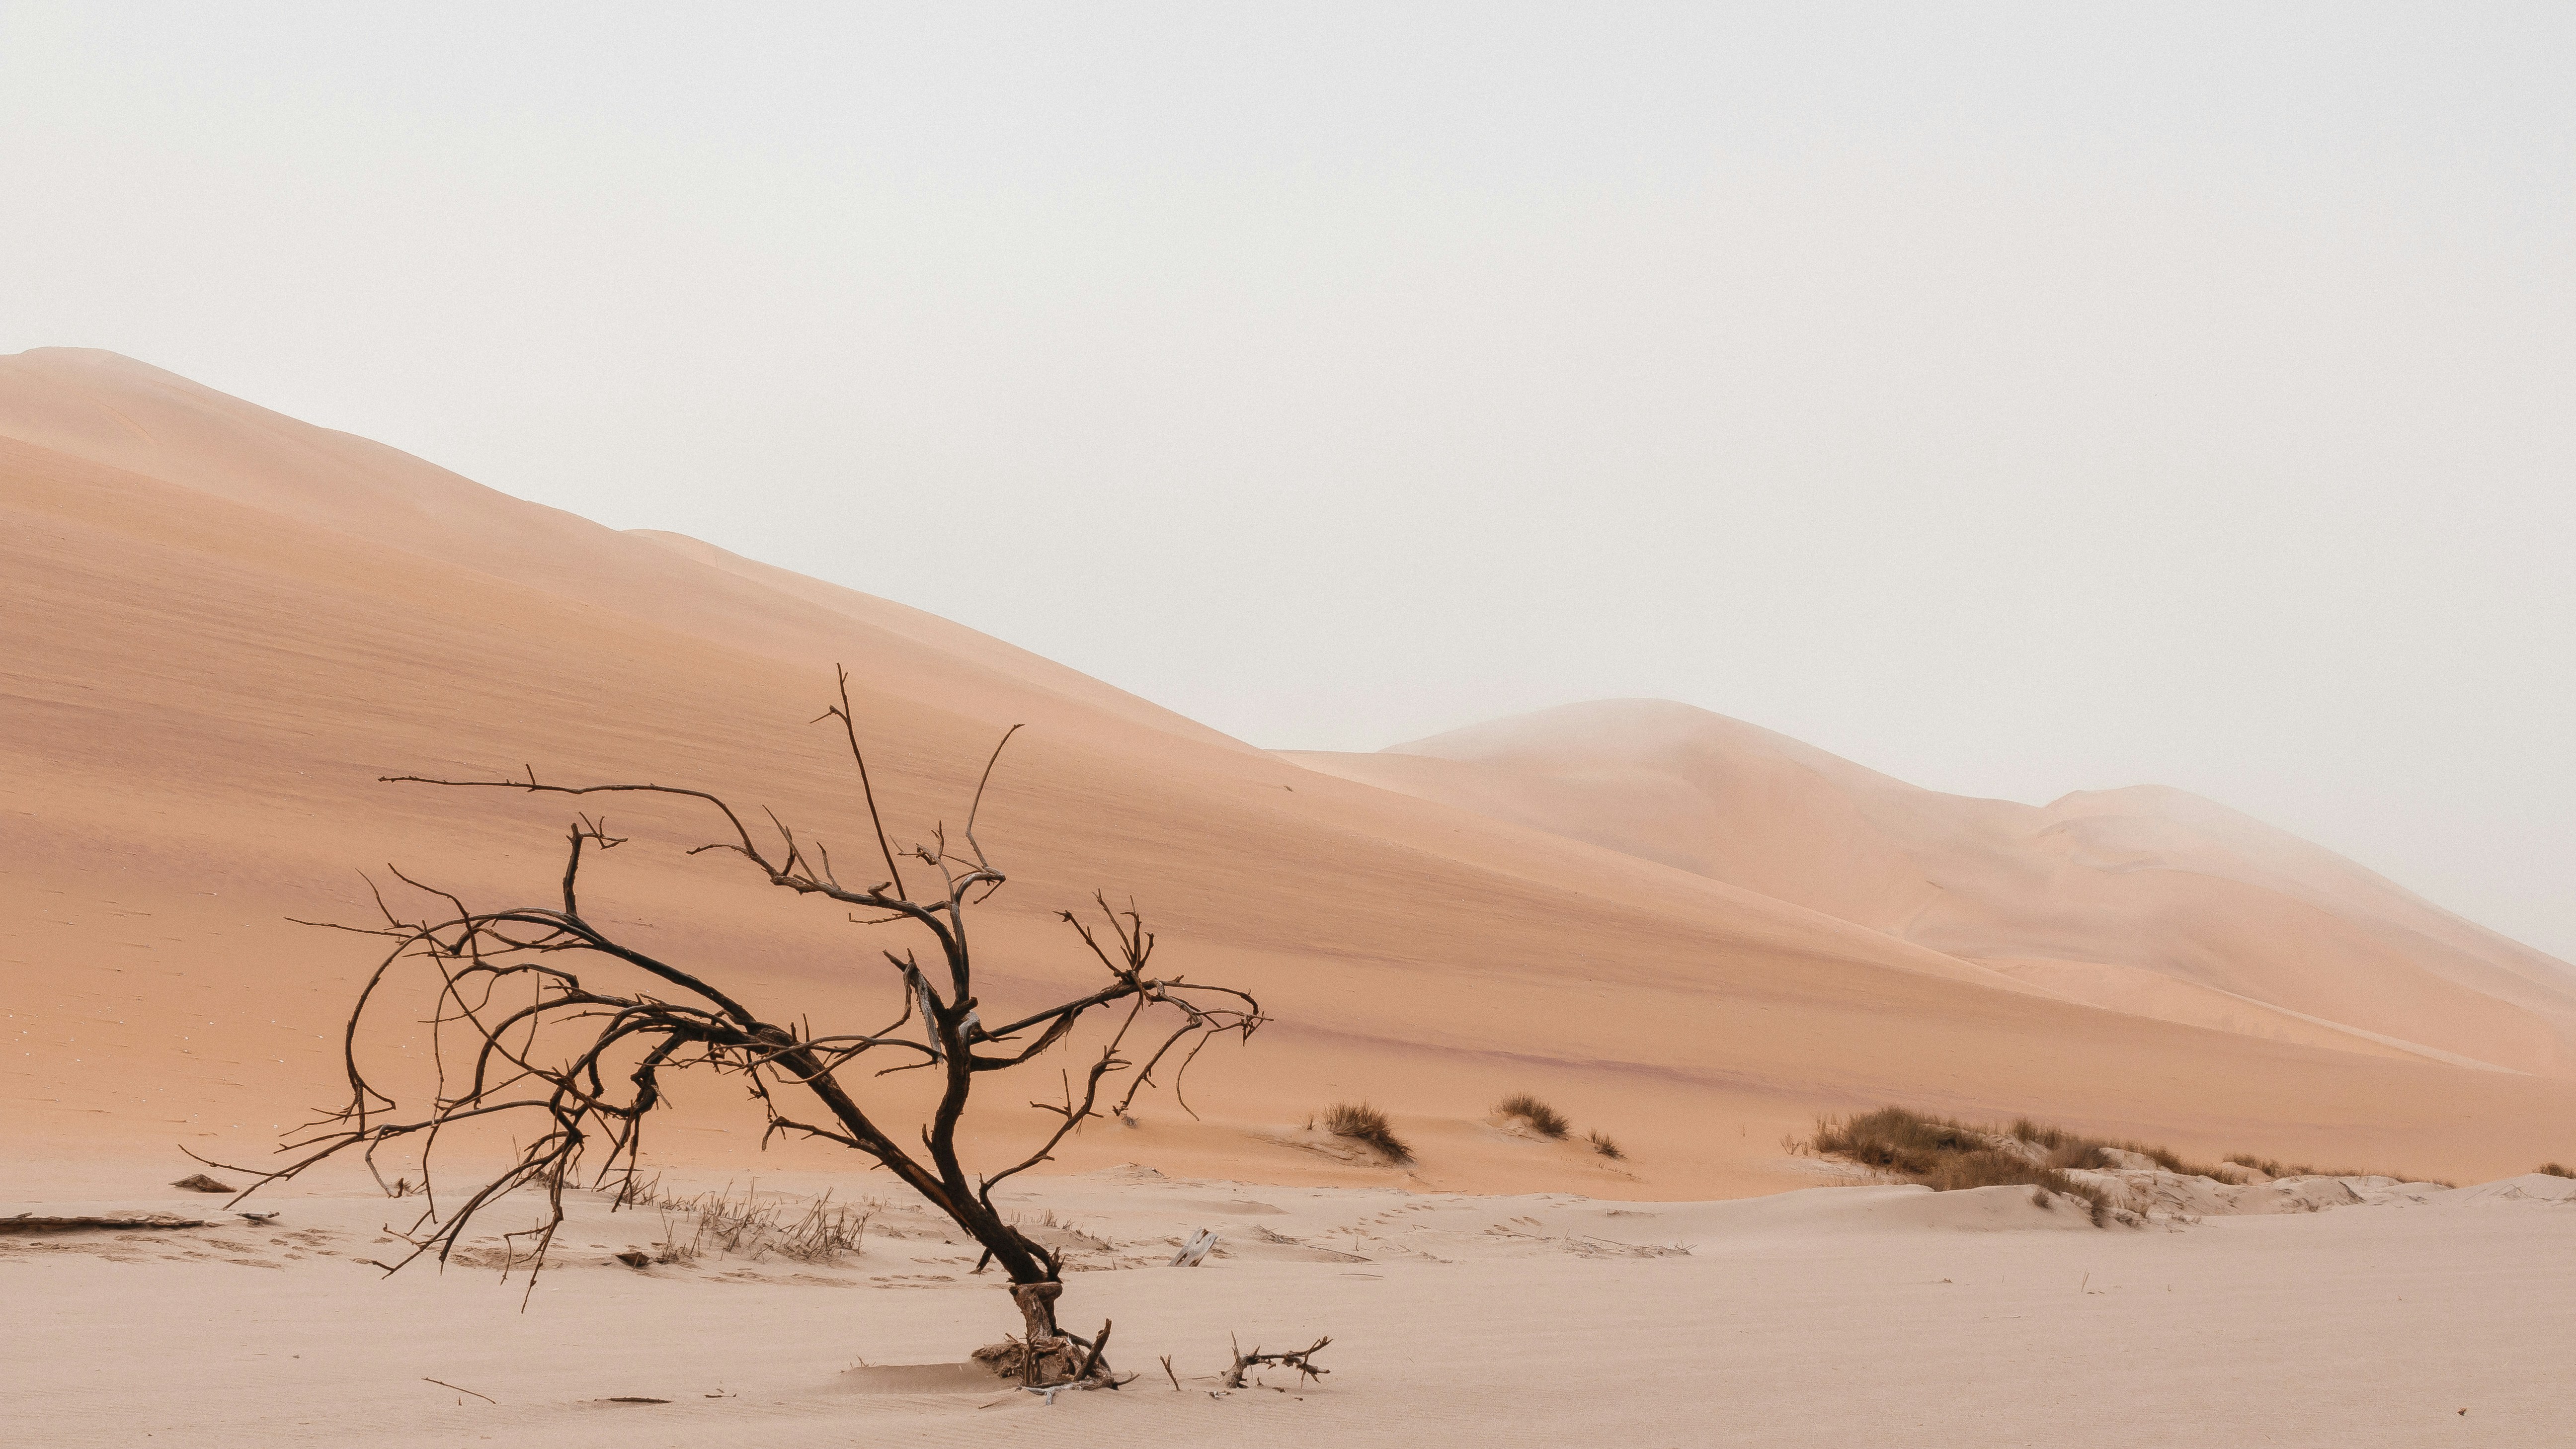 Choose from a curated selection of desert photos. Always free on Unsplash.